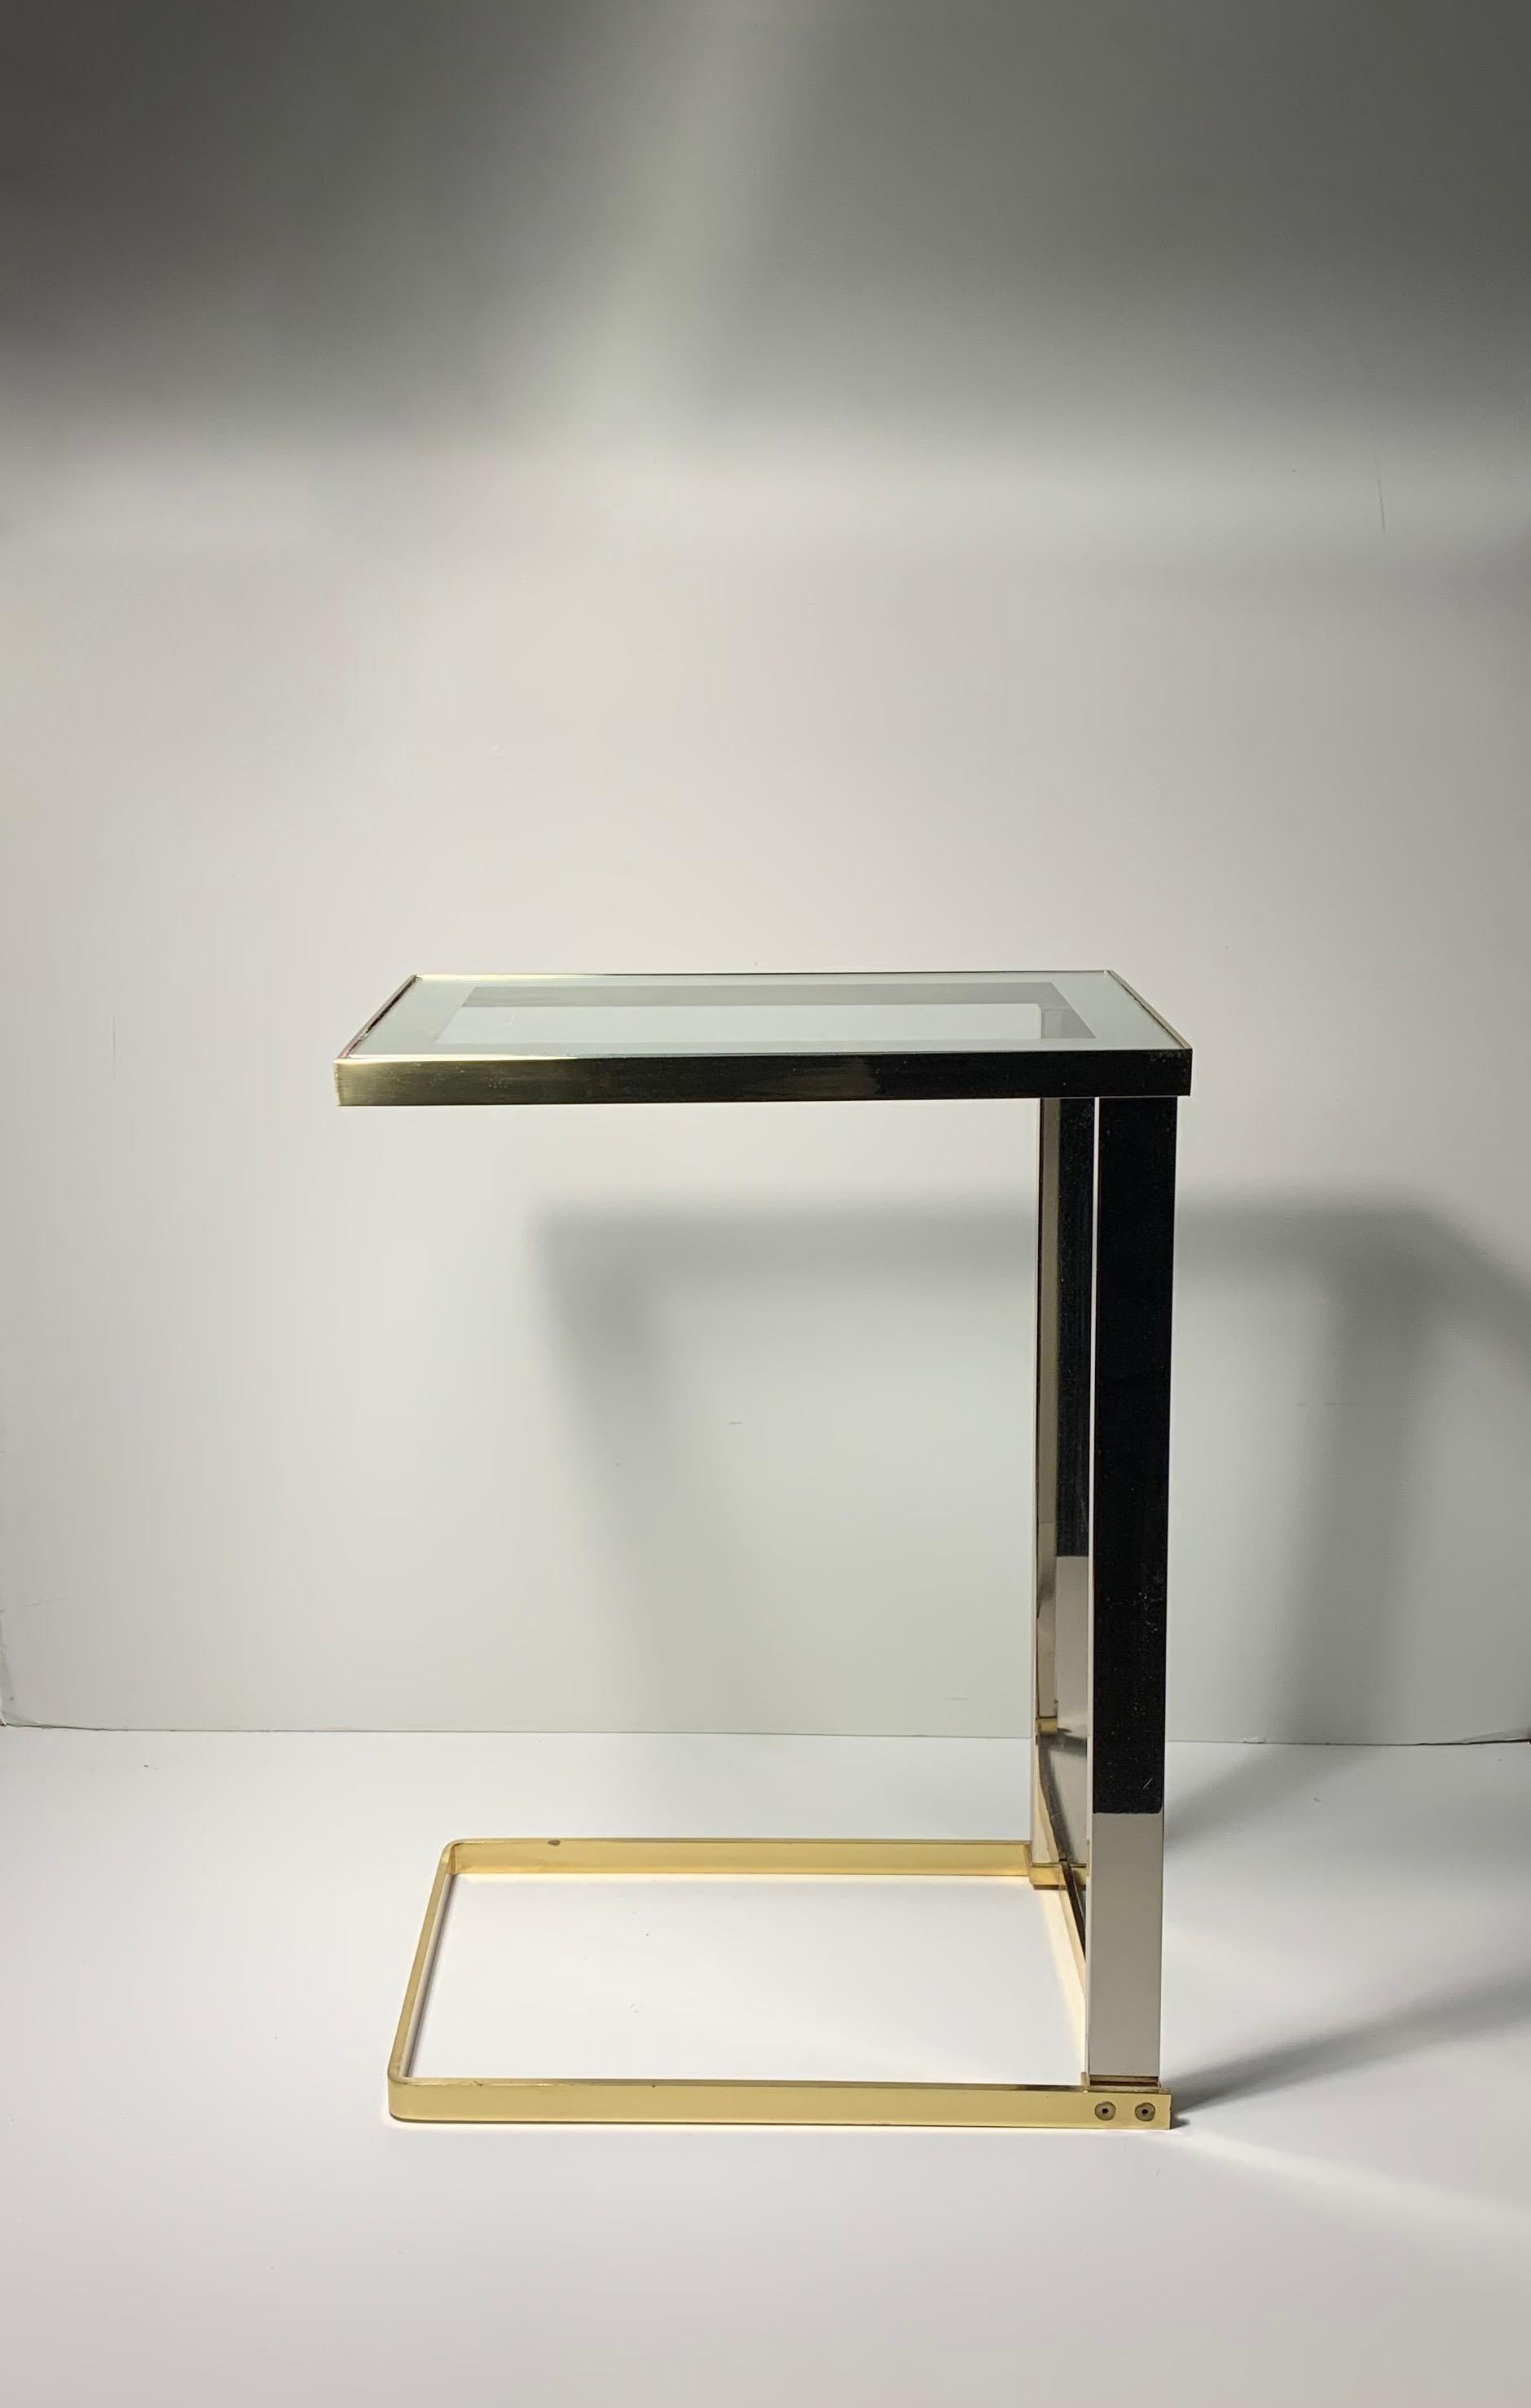 Vintage Postmodern DIA Cantilever brass and a dark chrome and glass Side End Table

An interesting architectural side table with a mirror border glass insert top that can be replaced easily.

In the manner of Milo Baughman and Leon Rosen for Pace 